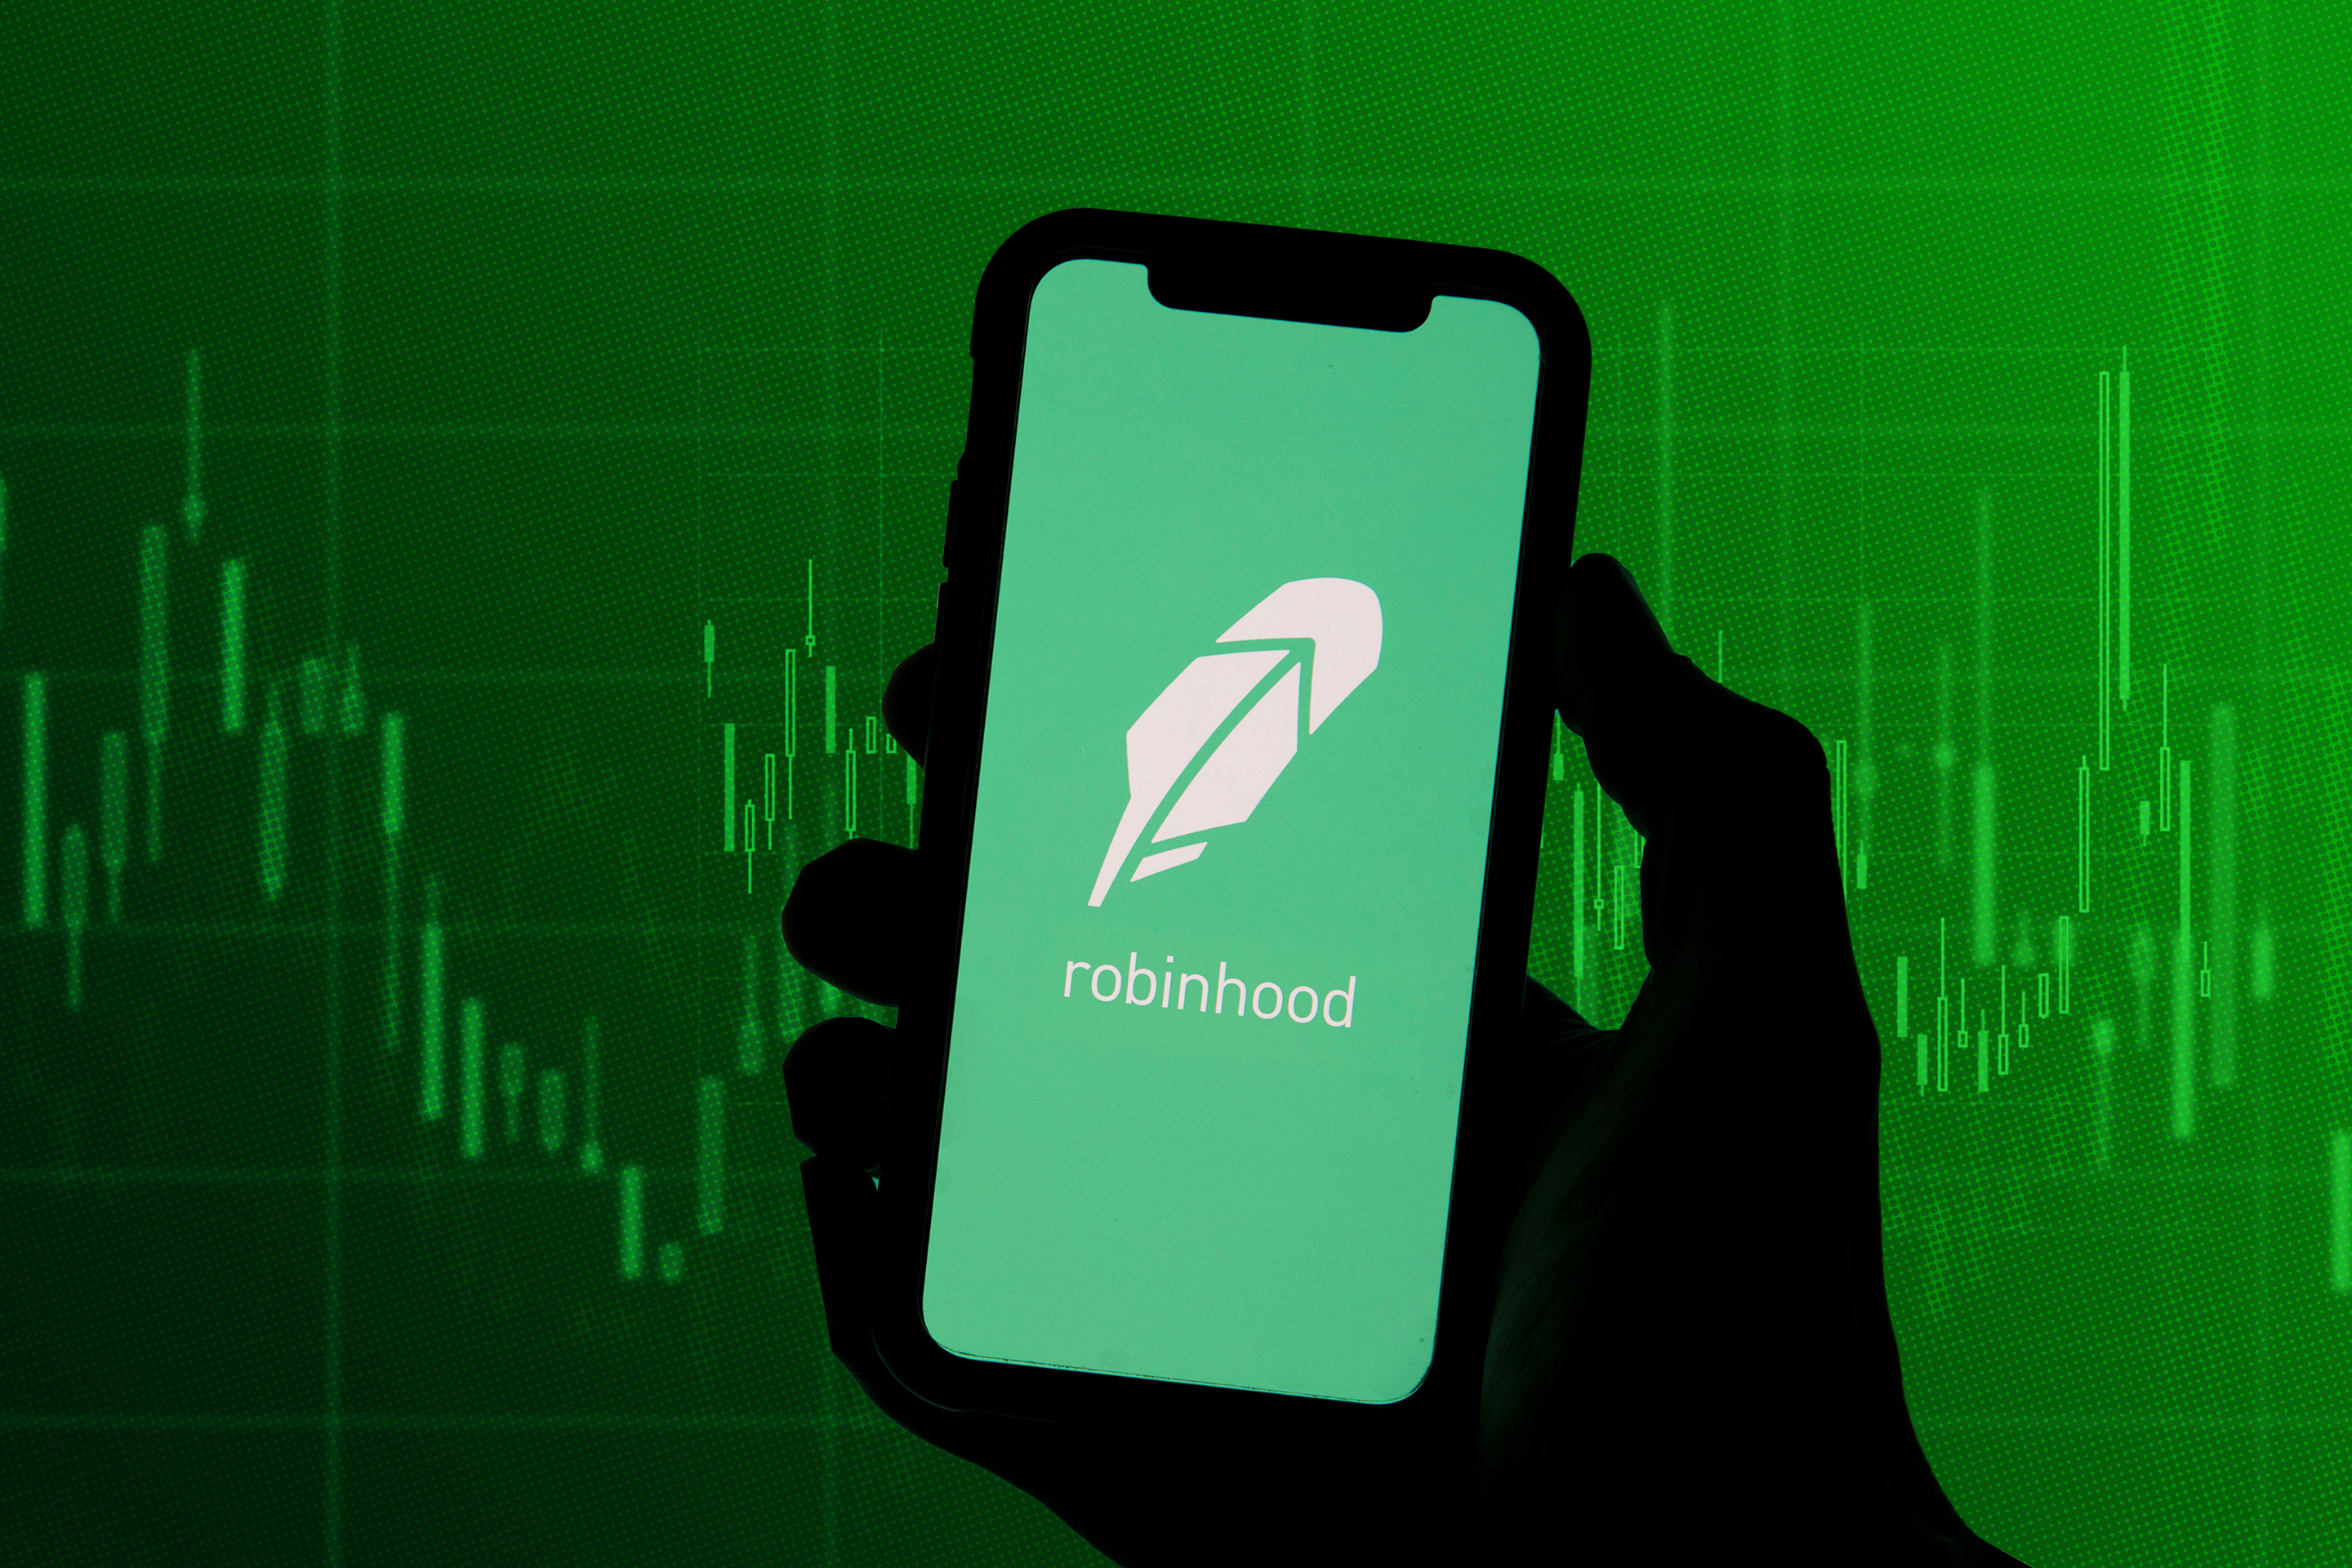 Robinhood Users Will Soon Be Able to Trade 24 Hours a Day, 5 Days a Week